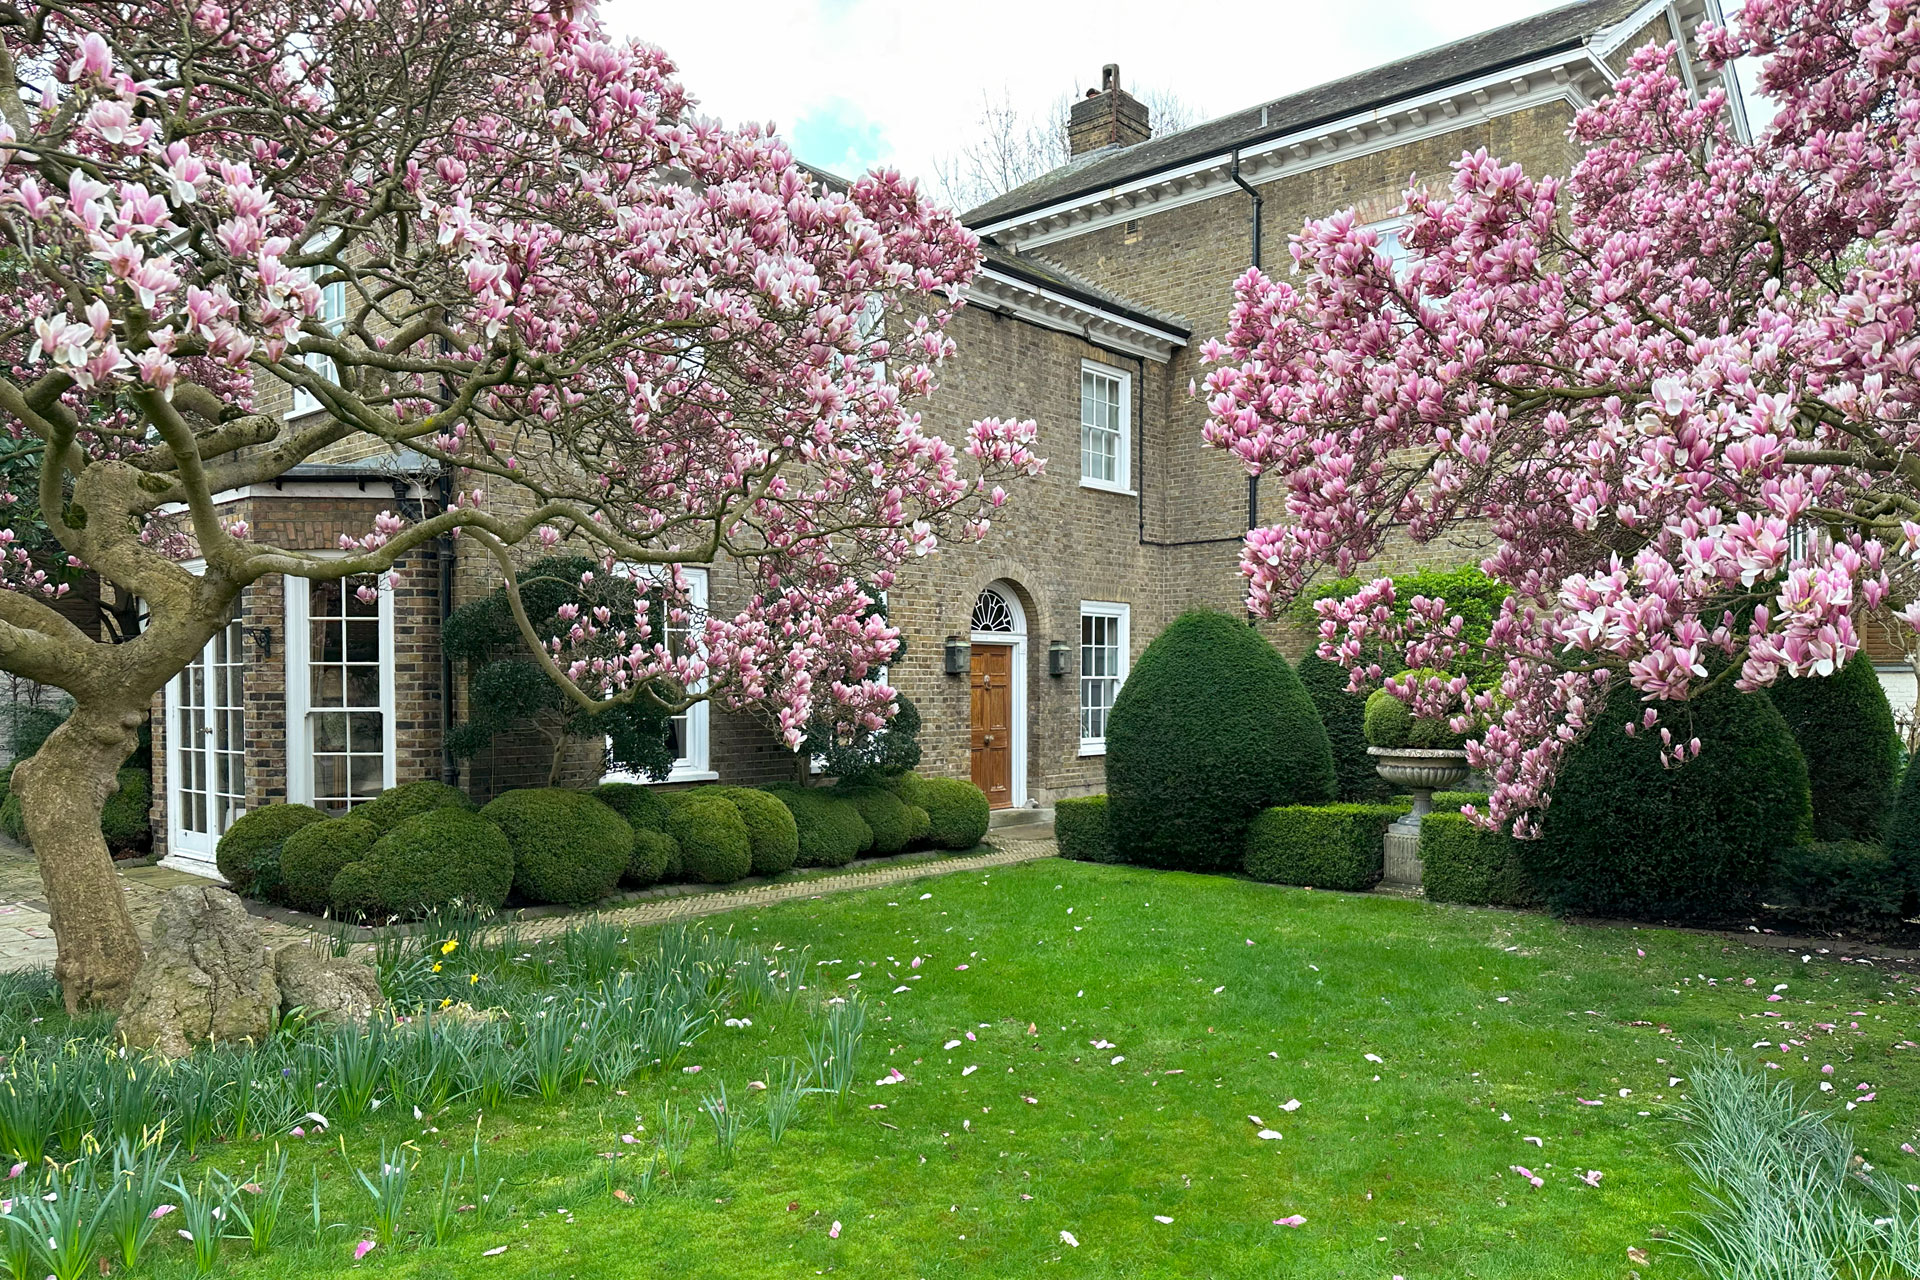 Neo-Georgian mansion in Kensington, surrounded by magnolia trees.